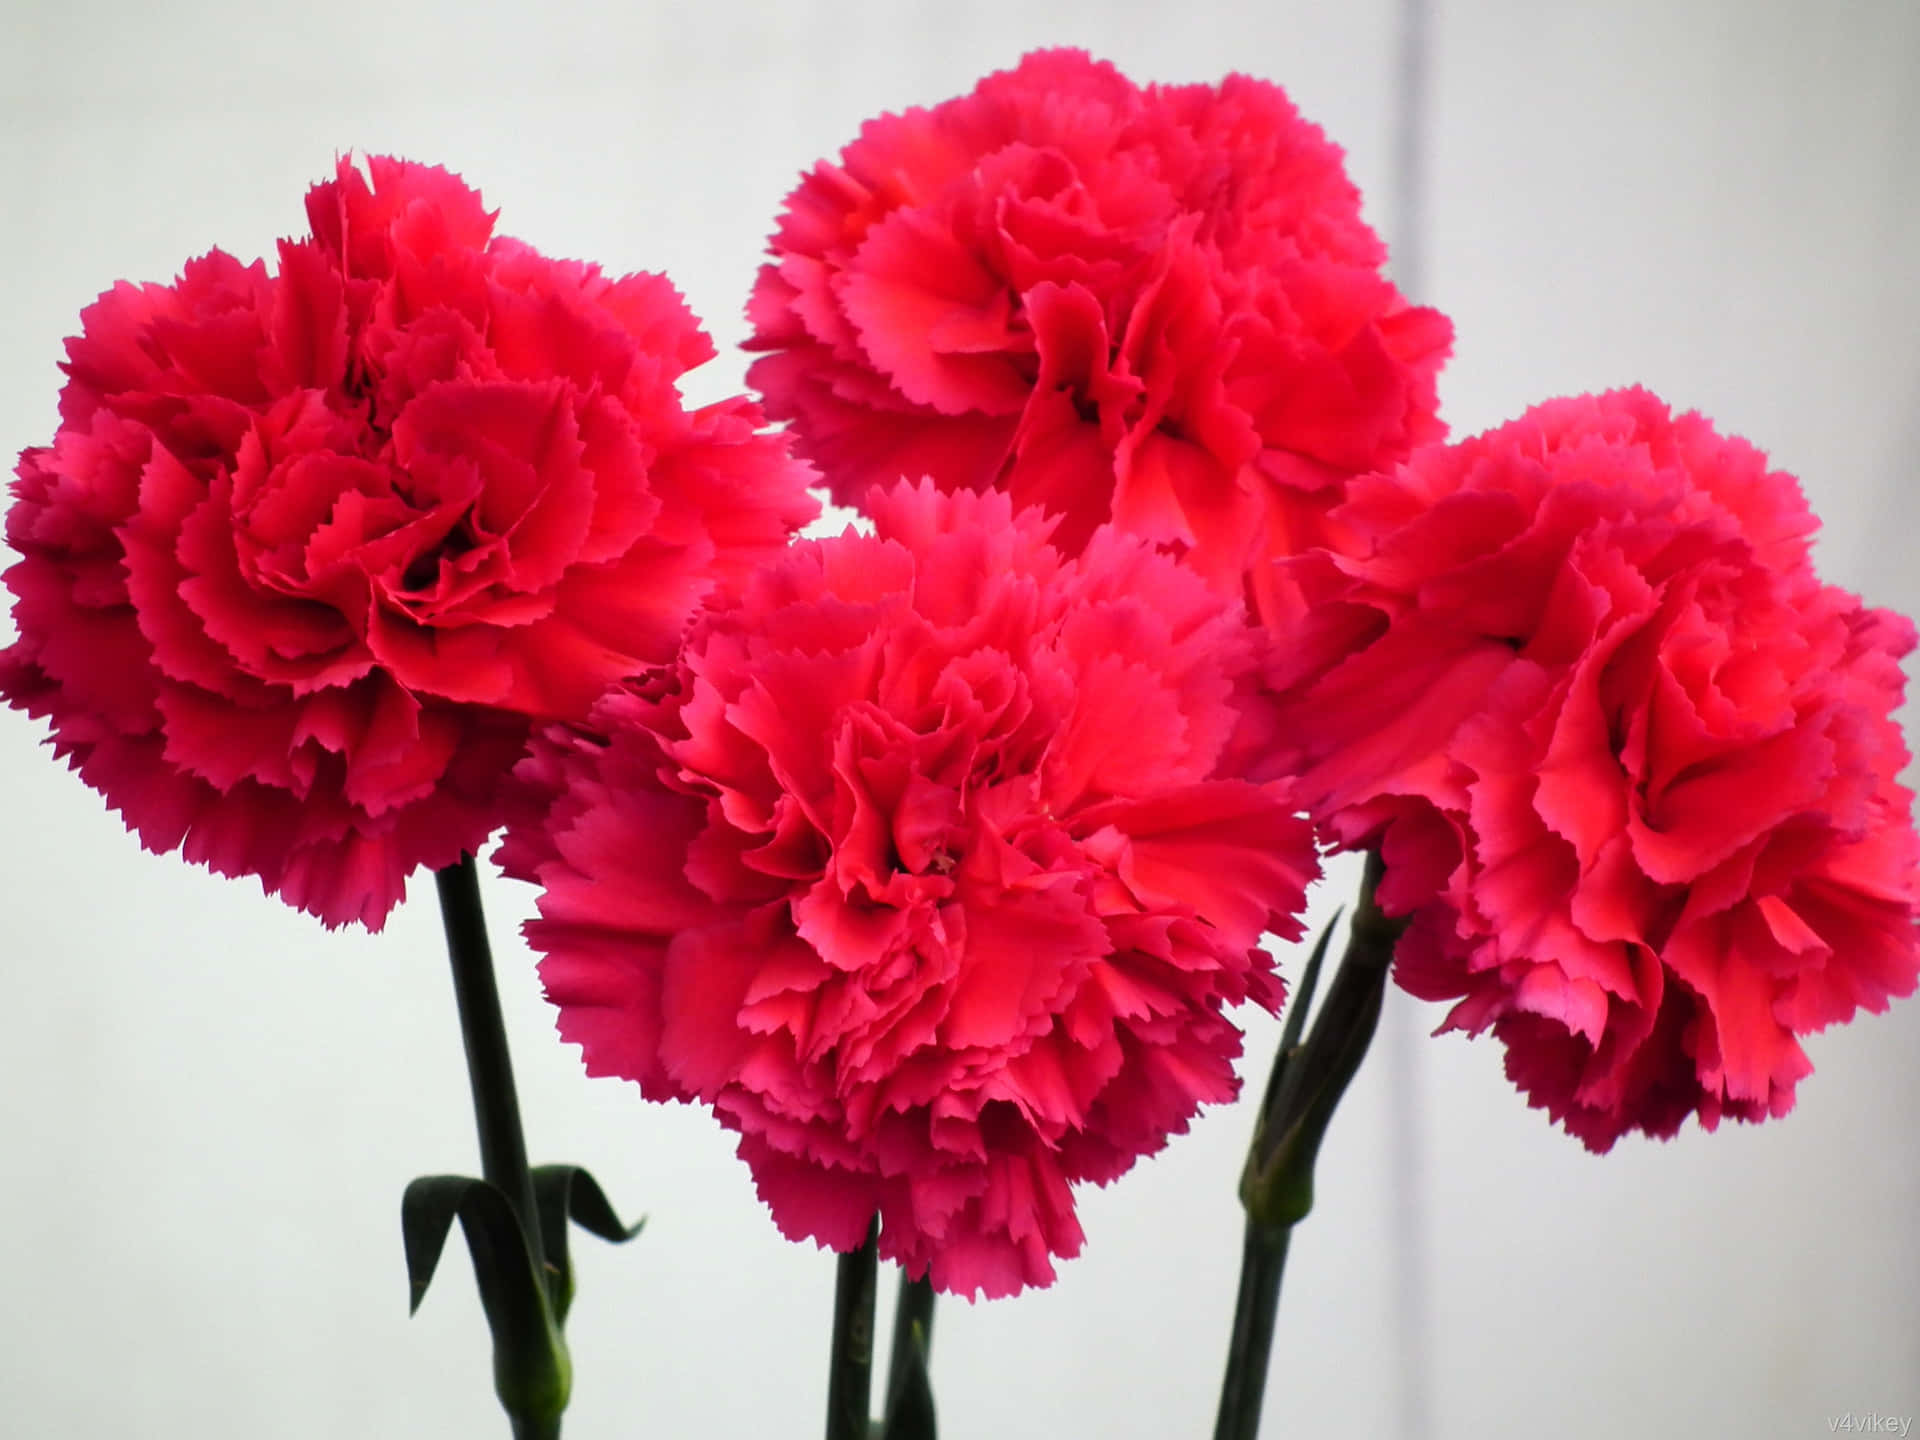 A vibrant bouquet of carnations with a unique blend of colors.